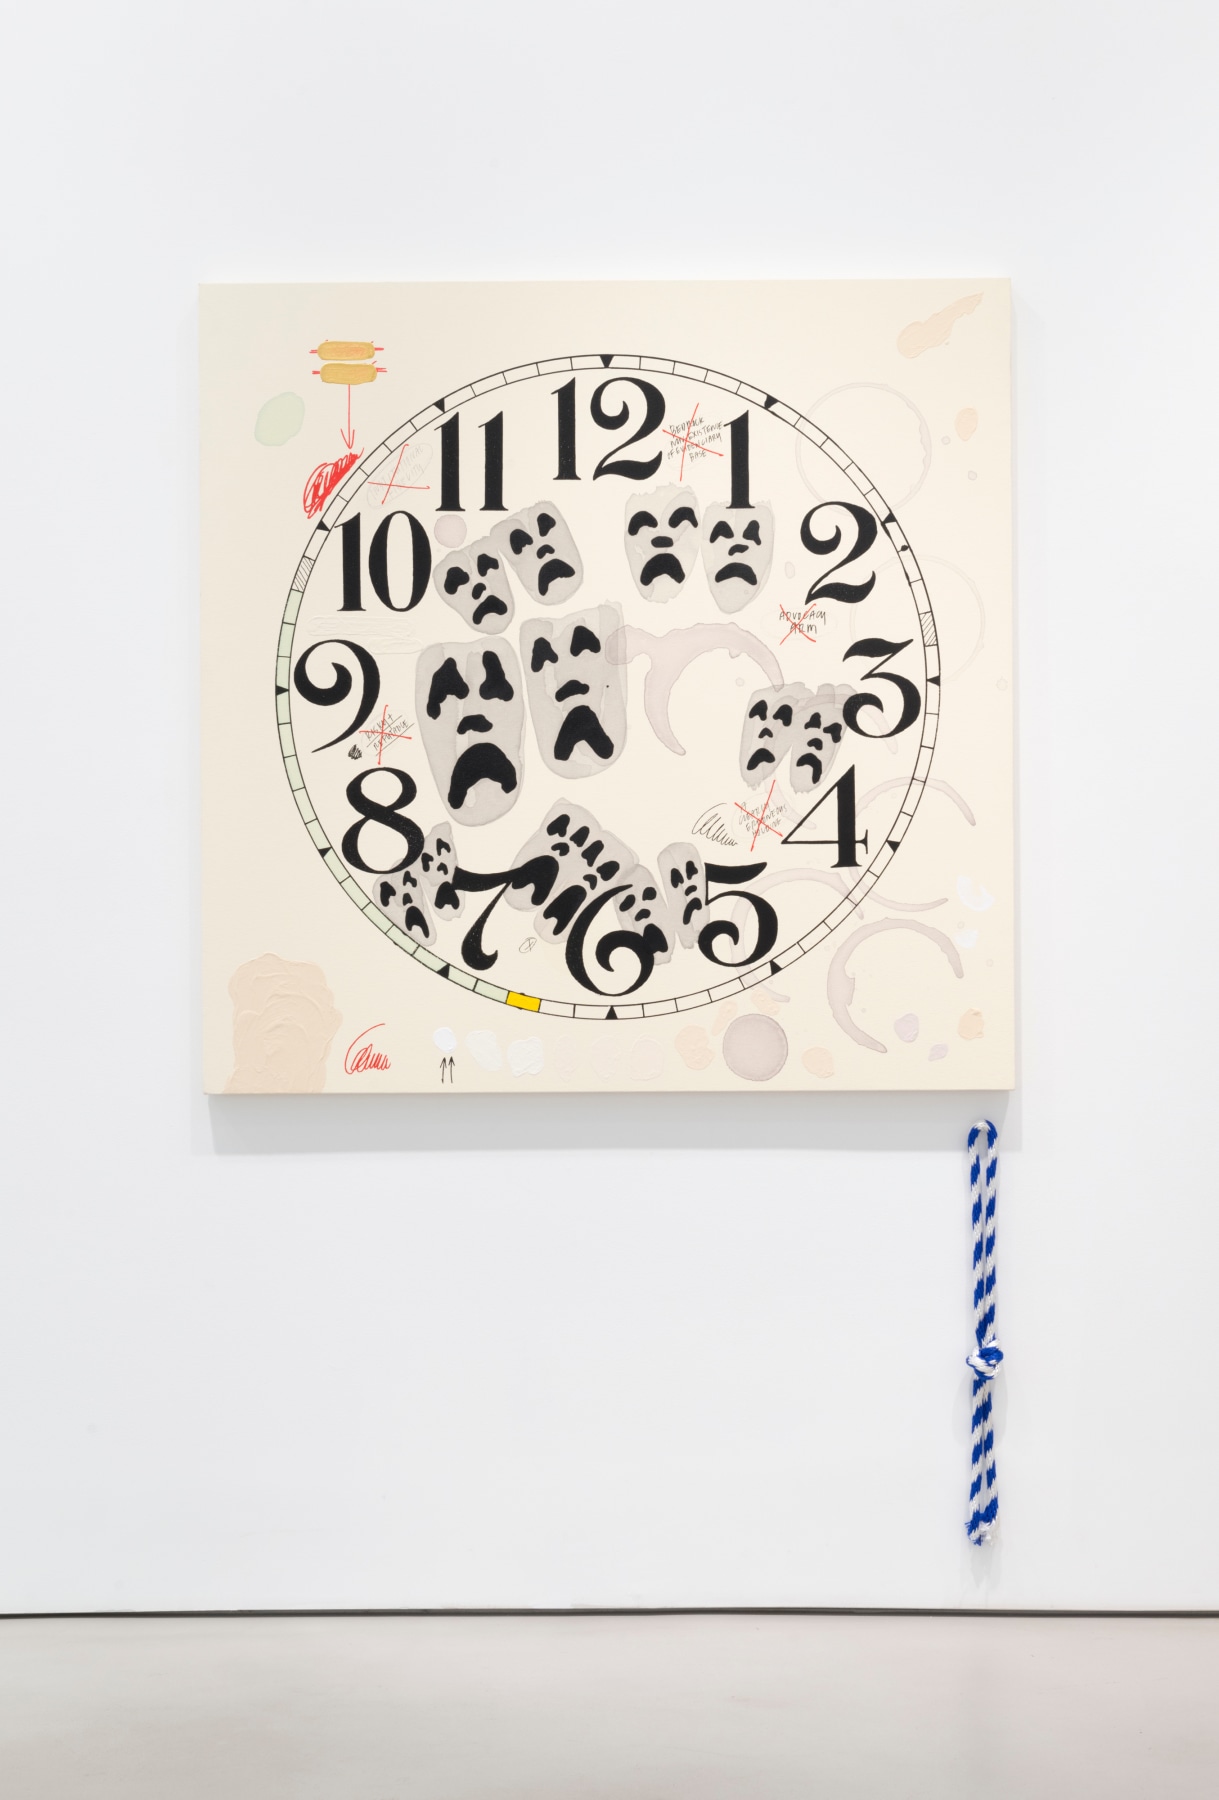 AMANDA ROSS-HO Untitled Timepiece (A CLEARLY ERRONEOUS HOLDING)